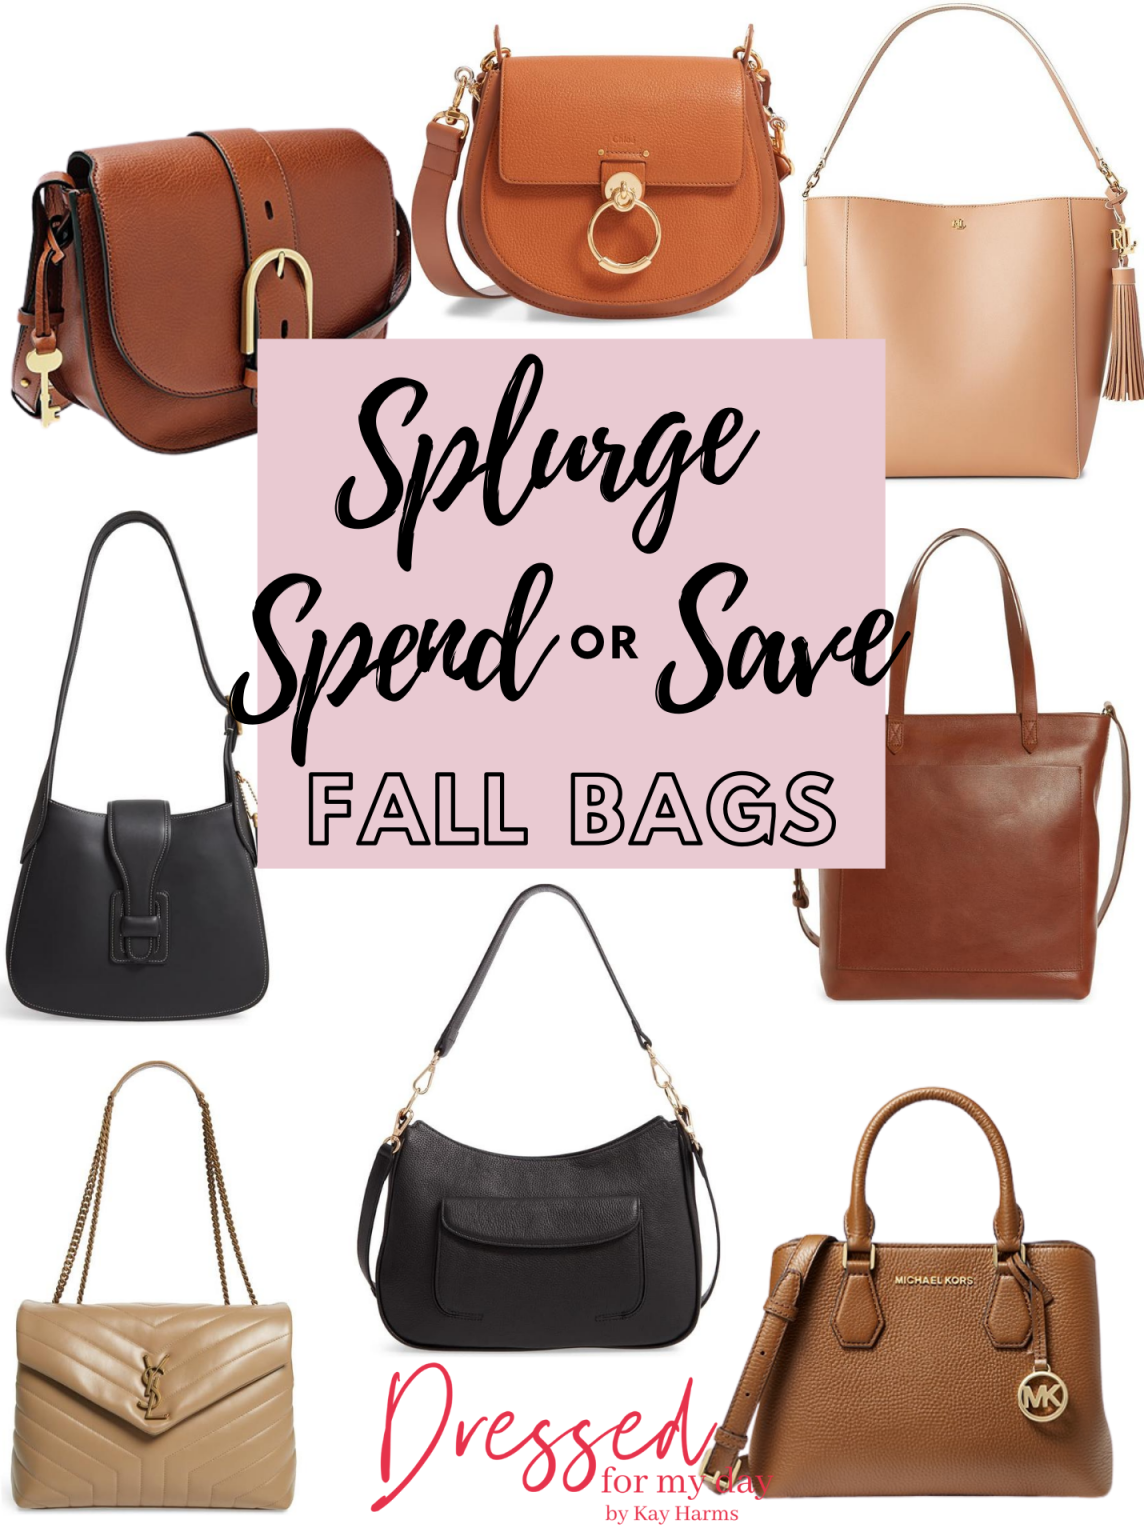 Fall Handbags - Splurge, Spend or Save - Dressed for My Day